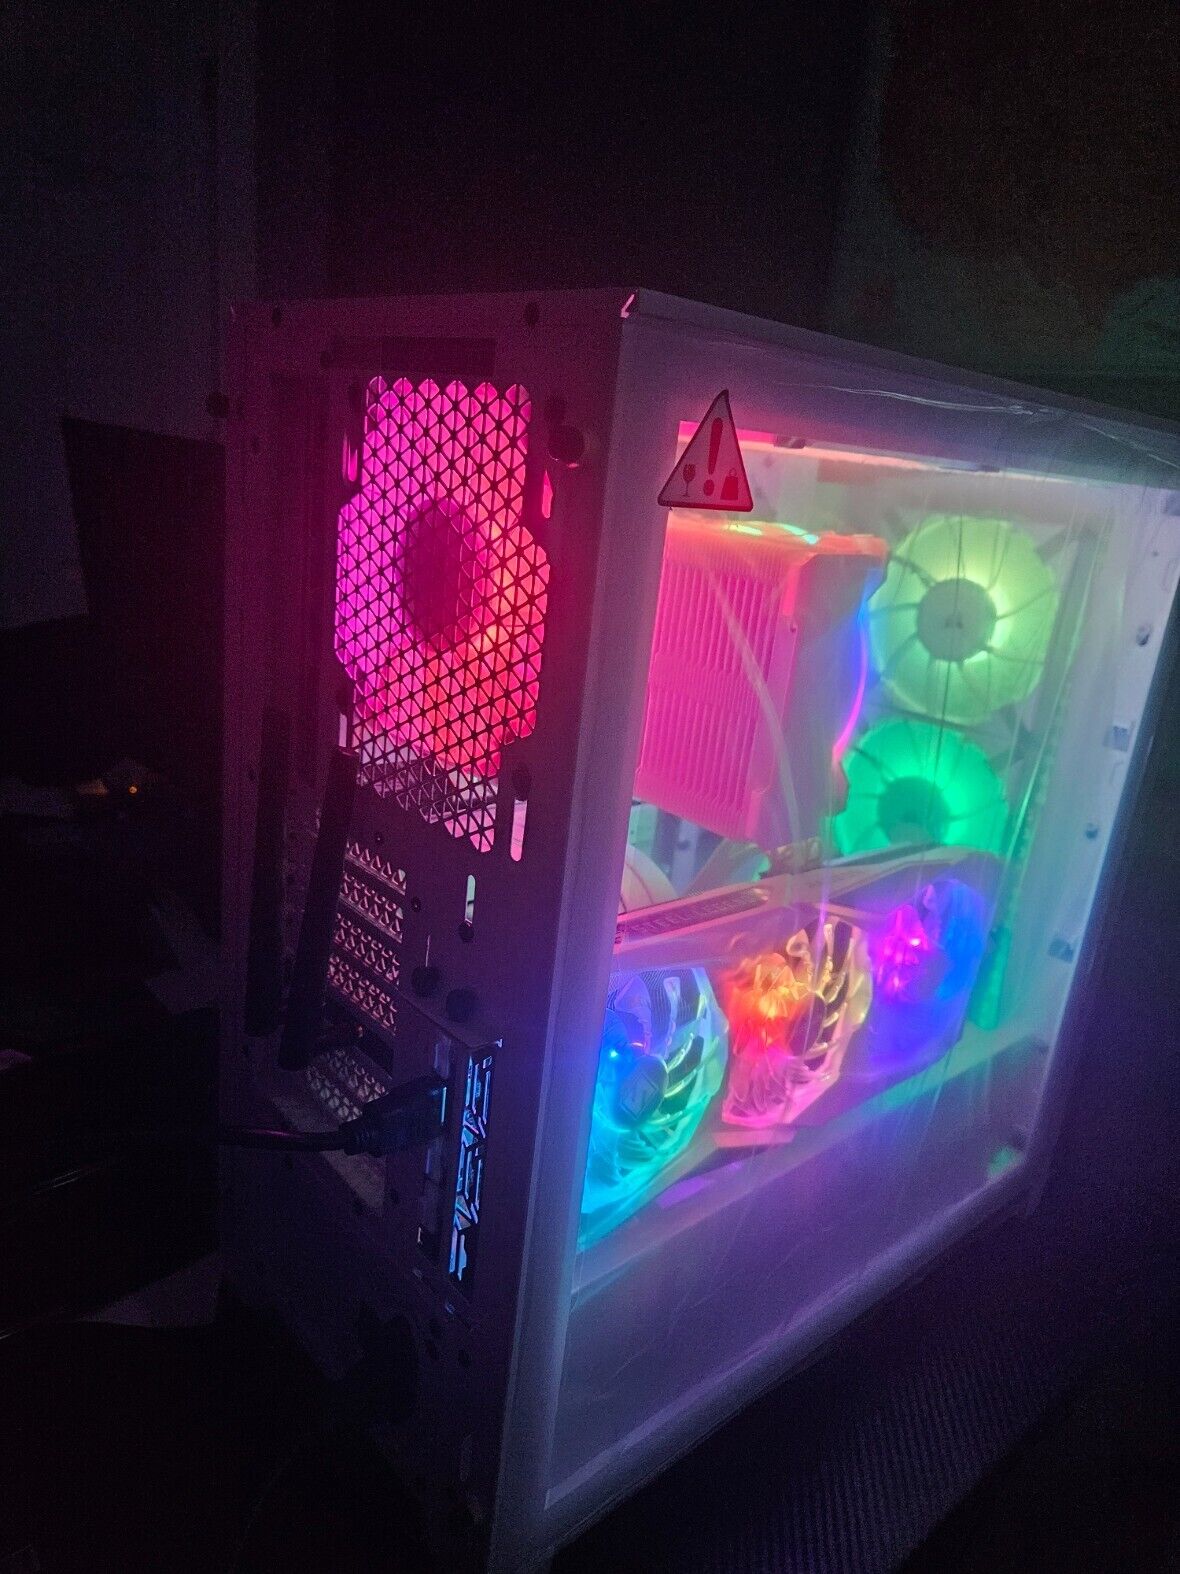 All White custom PC for Sale with an AMD Ryzen 7 and Radeon 7600 XT